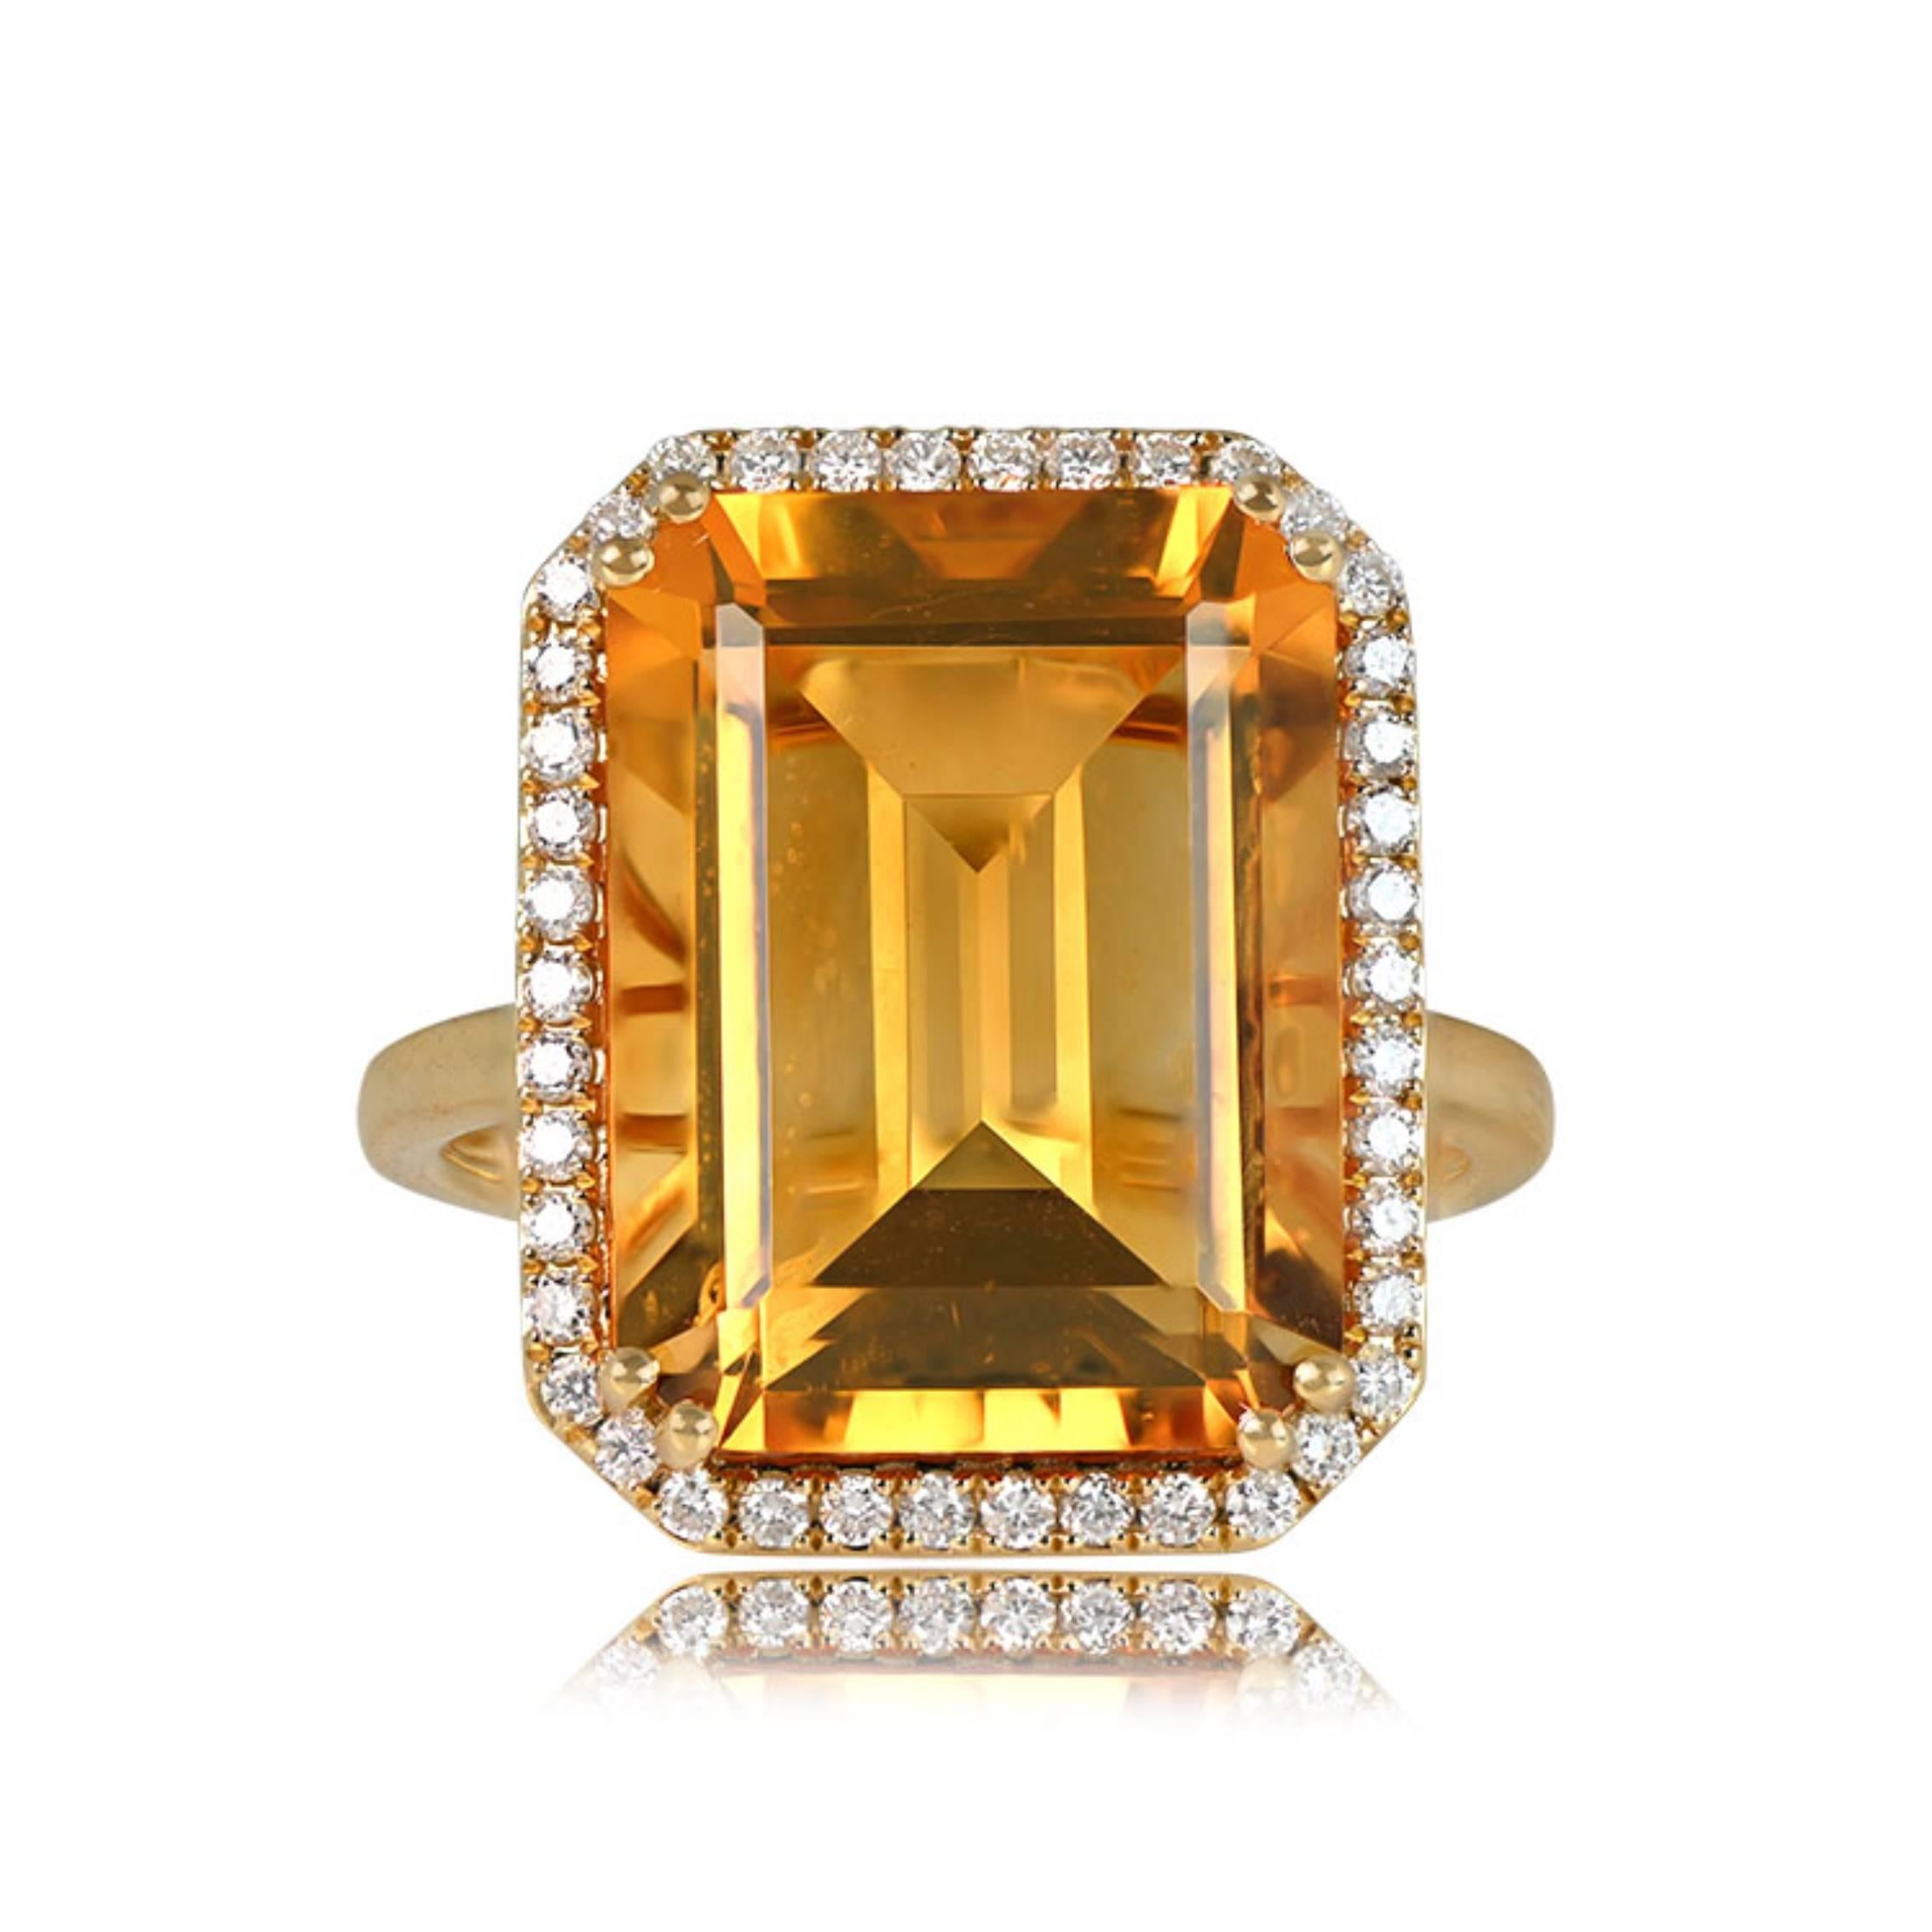 Elevate your style with this vibrant emerald-cut natural citrine cocktail ring. Boasting an 11.35-carat deep orange citrine, delicately secured in 18k yellow gold double prongs, the ring exudes opulence. A captivating halo of round brilliant-cut